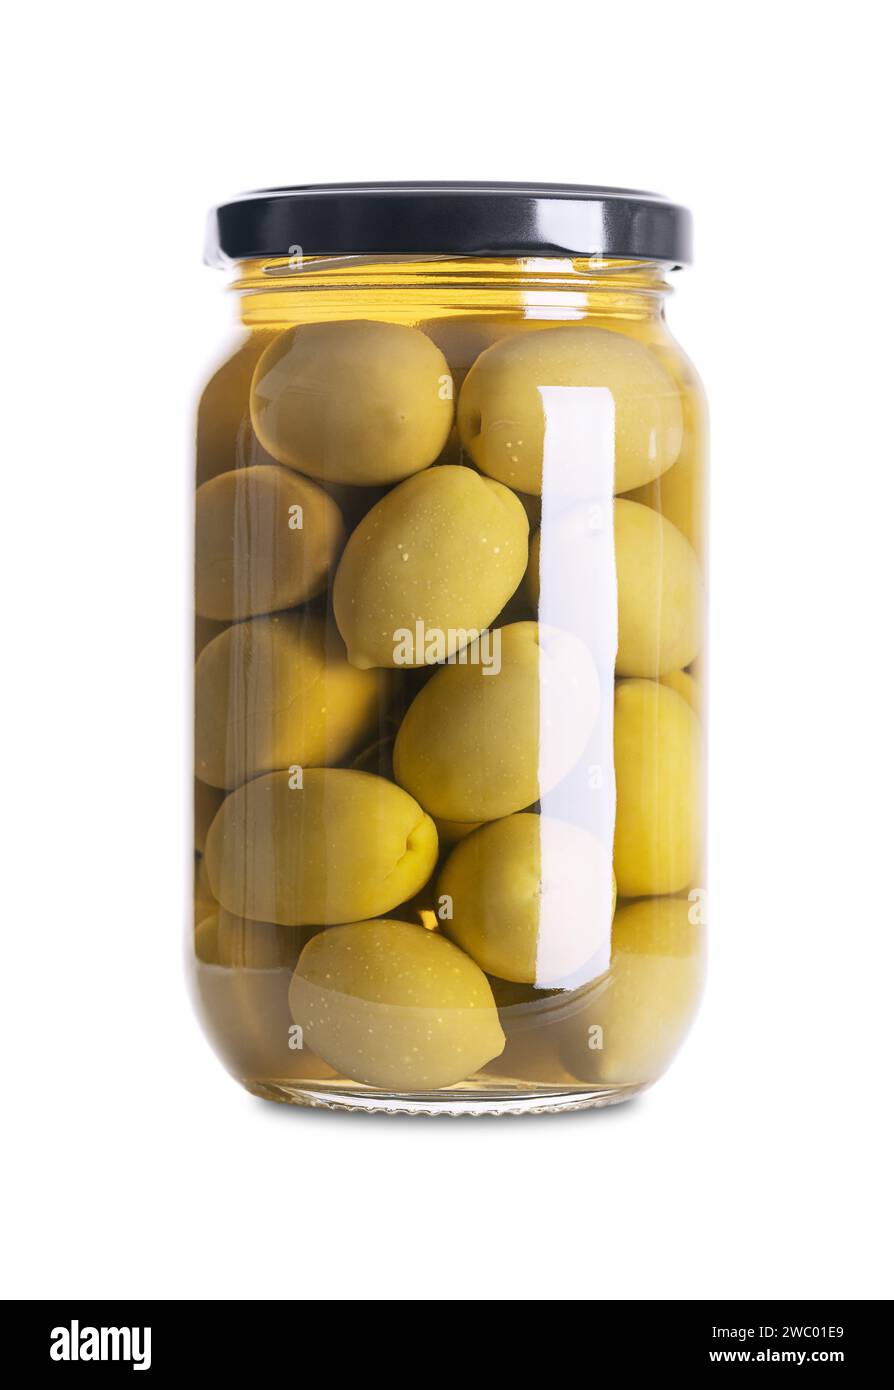 Green olives with pit, pickled whole, large Greek table olives, in a glass jar with screw cap. Whole fruits, picked when they are still unripe. Stock Photo